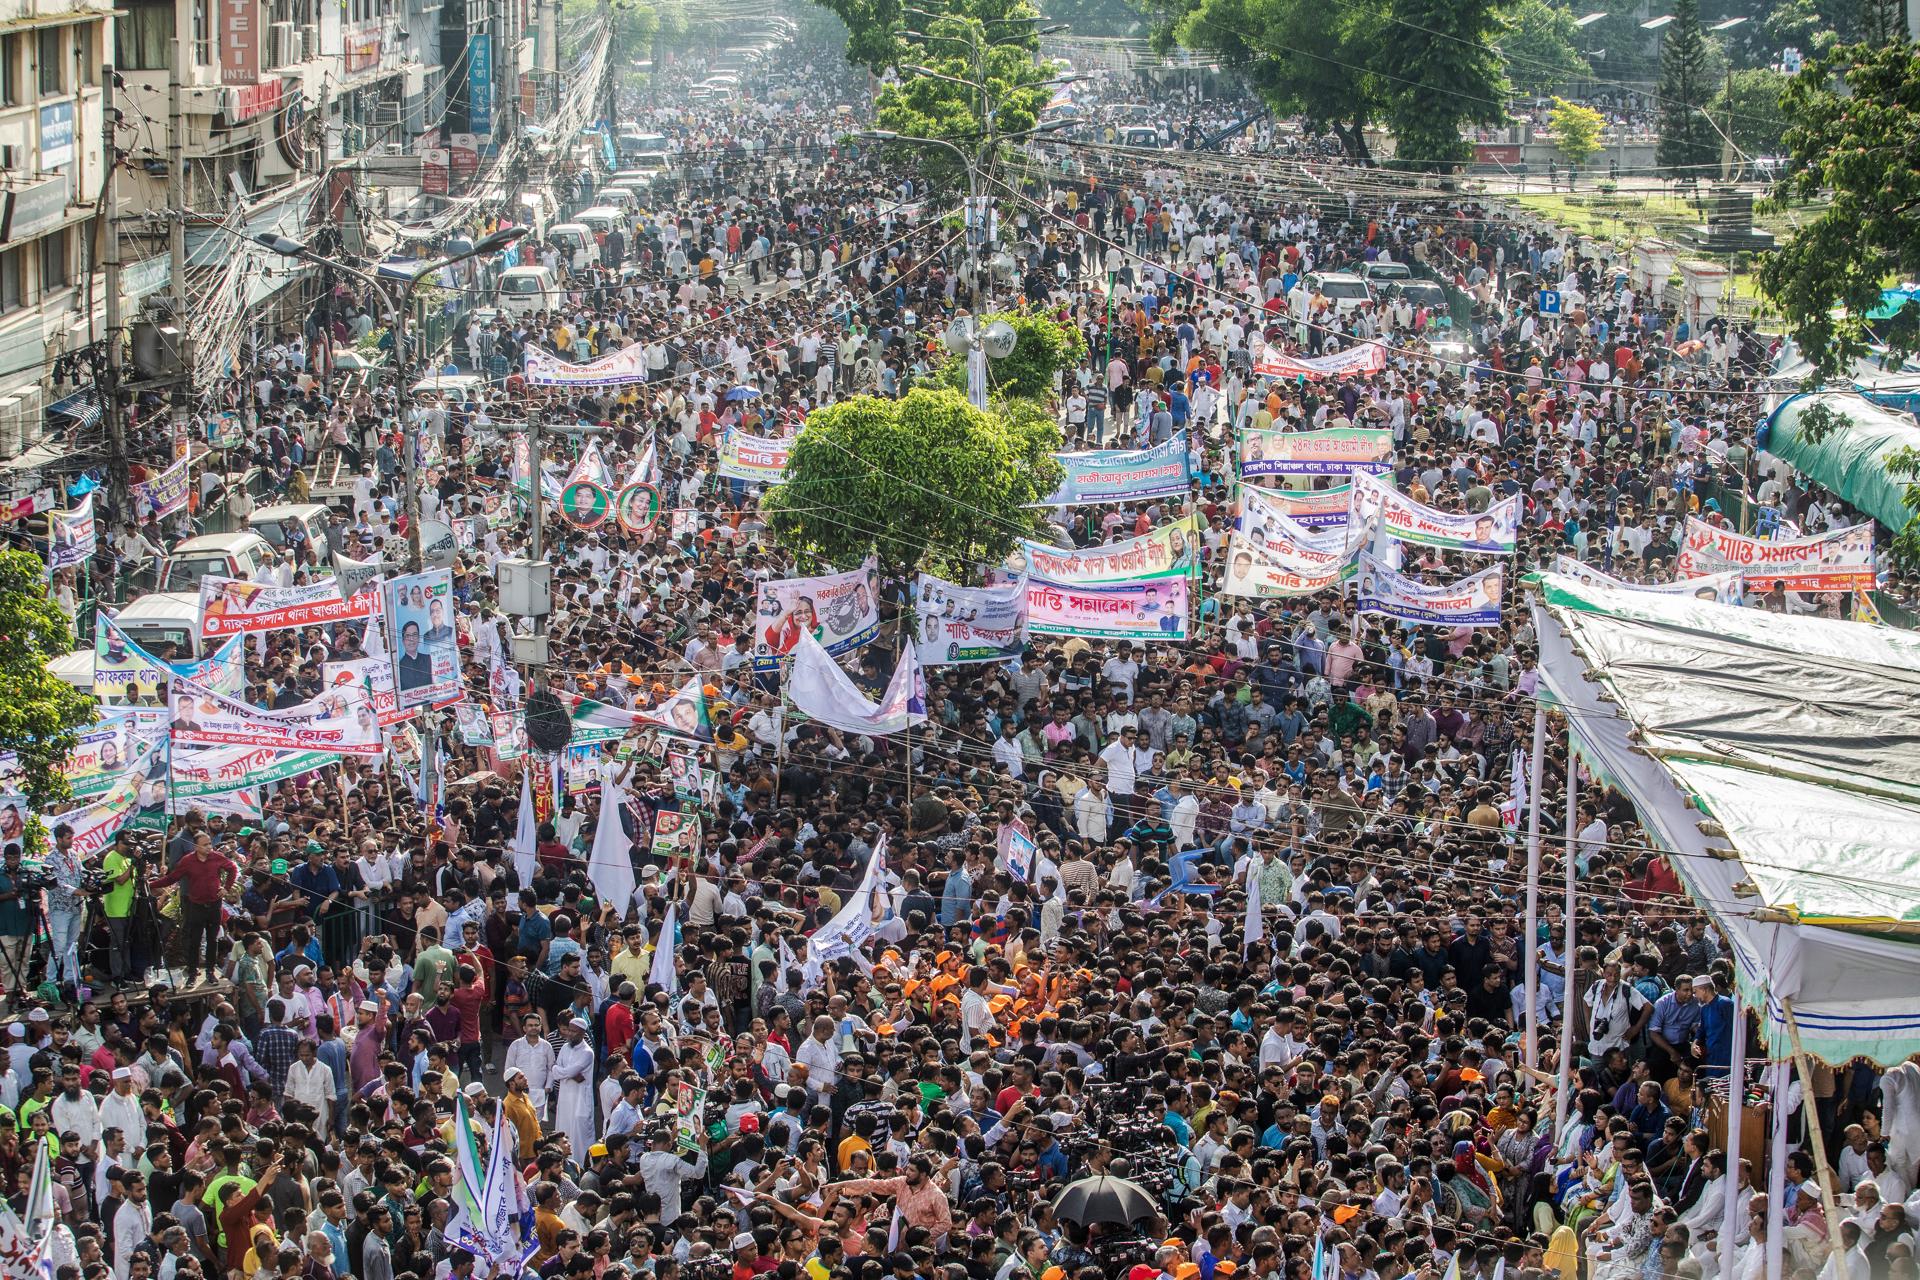 Supporters of the Bangladesh Awami League (AL) ruling party carry banners as they gather during a peace rally in front of the South gate of Baitul Mukarram National Mosque in Dhaka, Bangladesh, 12 July 2023. EFE/EPA/MONIRUL ALAM
